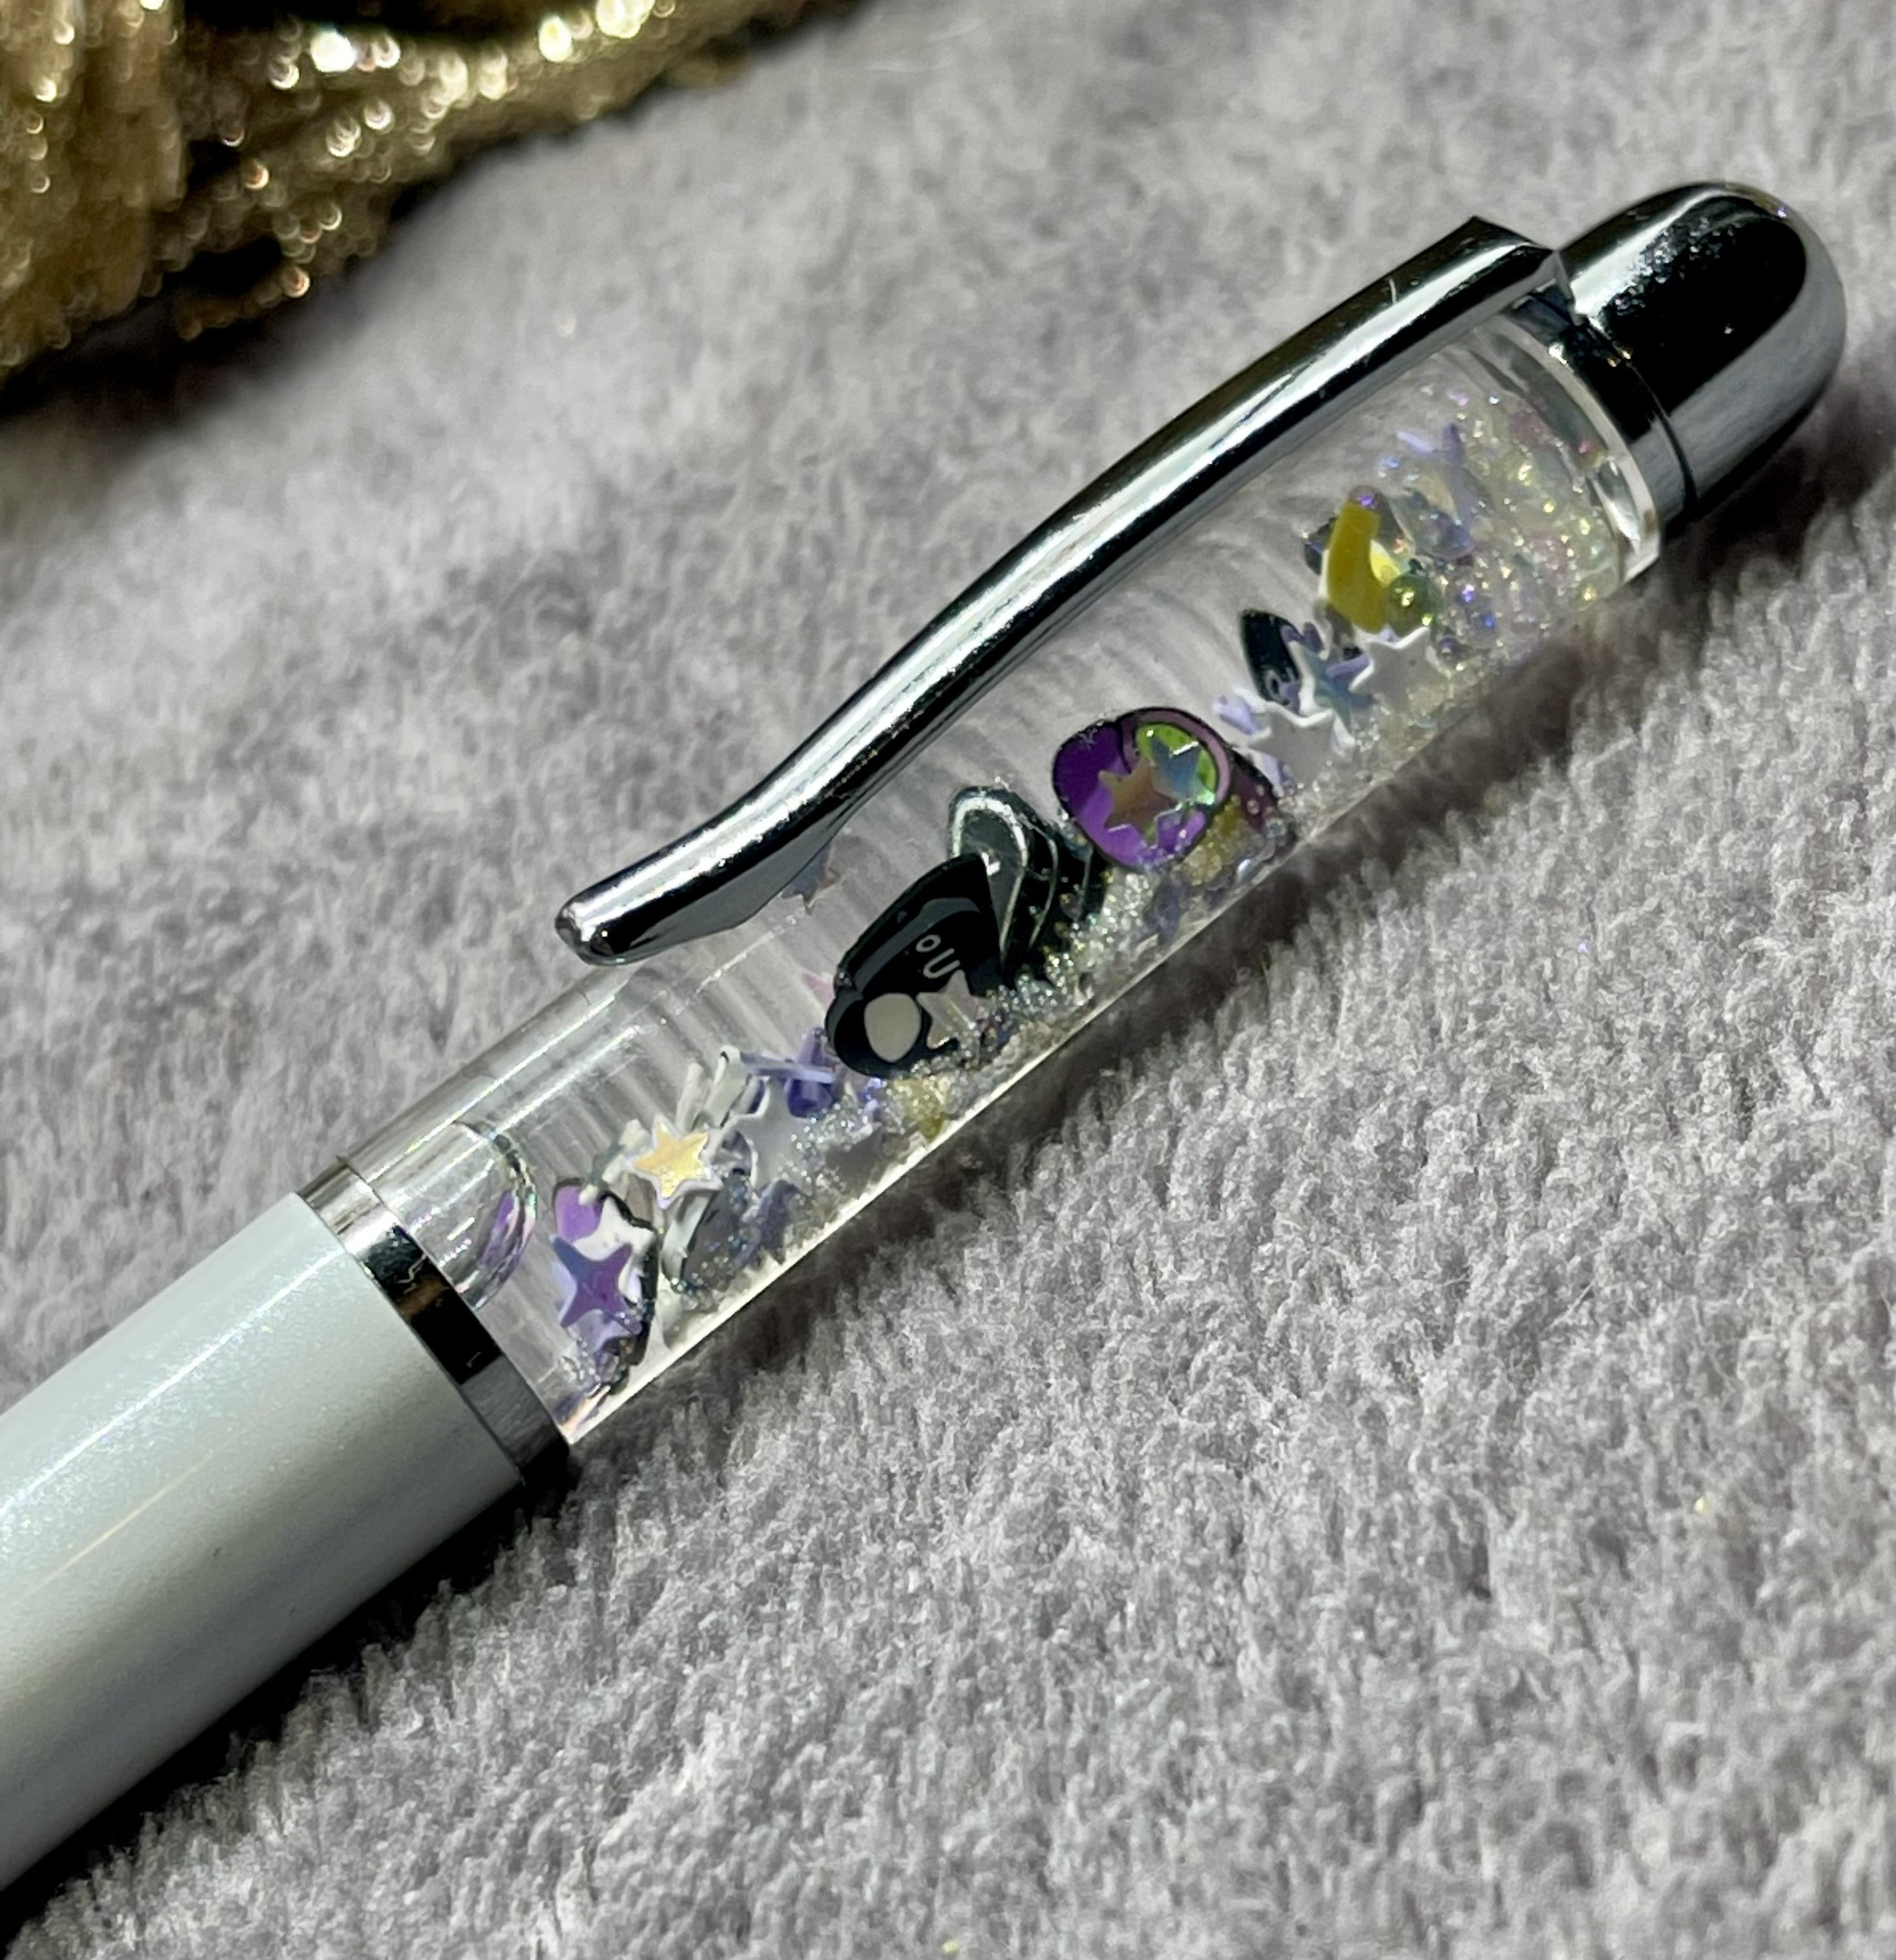 Witchy Spell Pens / Bewitch Love Spell / Protection / Serenity / Bliss /  Prosperity Good Luck / Empower / Crystals / Unique Pen / Magical 